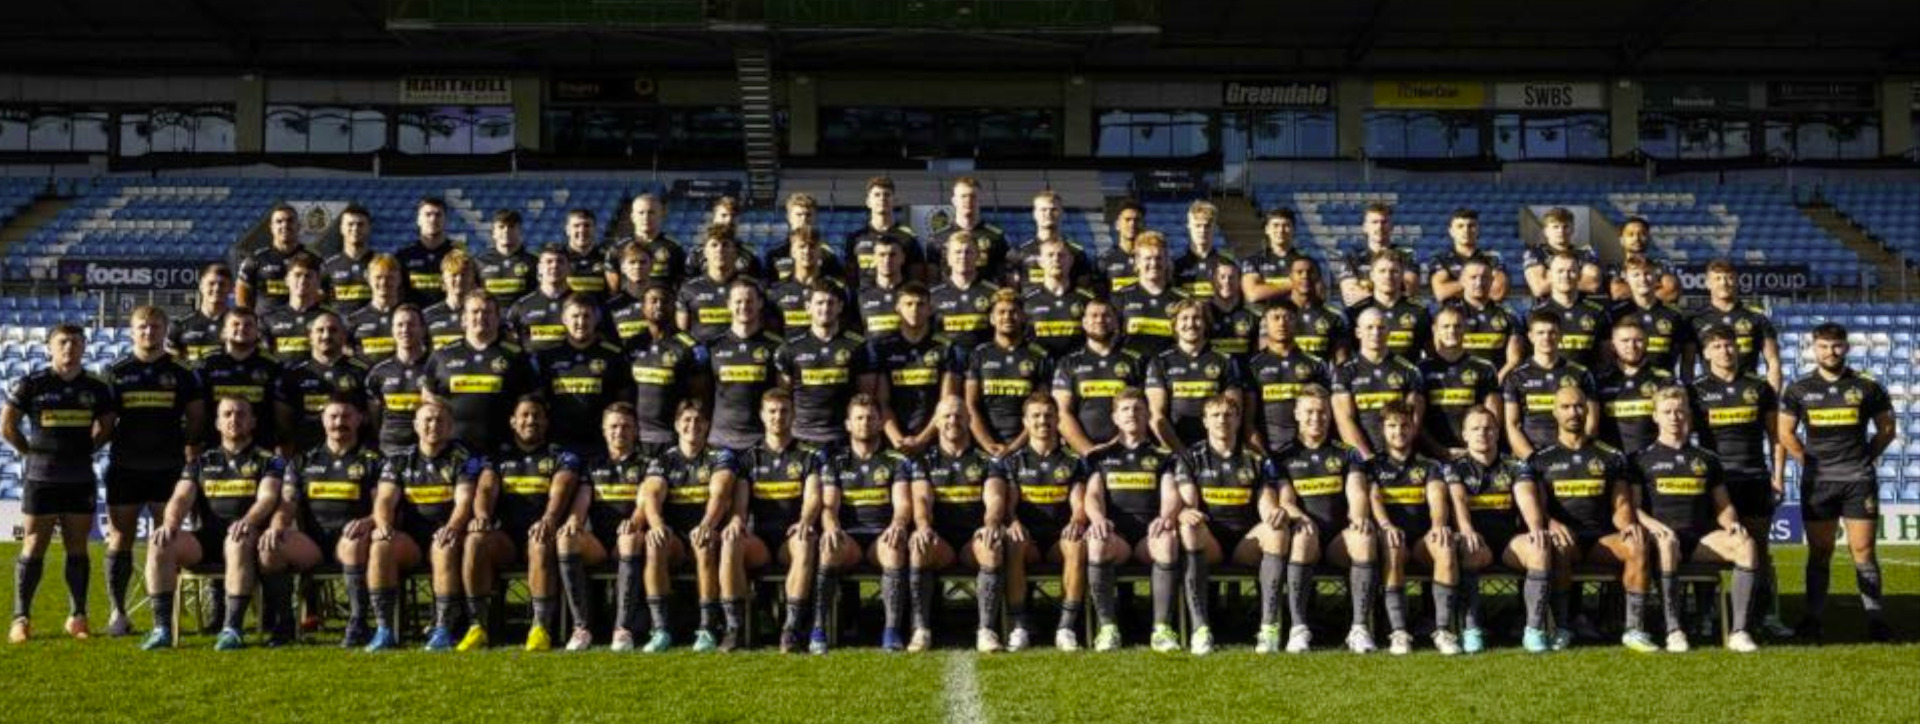 Image of Exeter Chiefs rugby team on home turf.